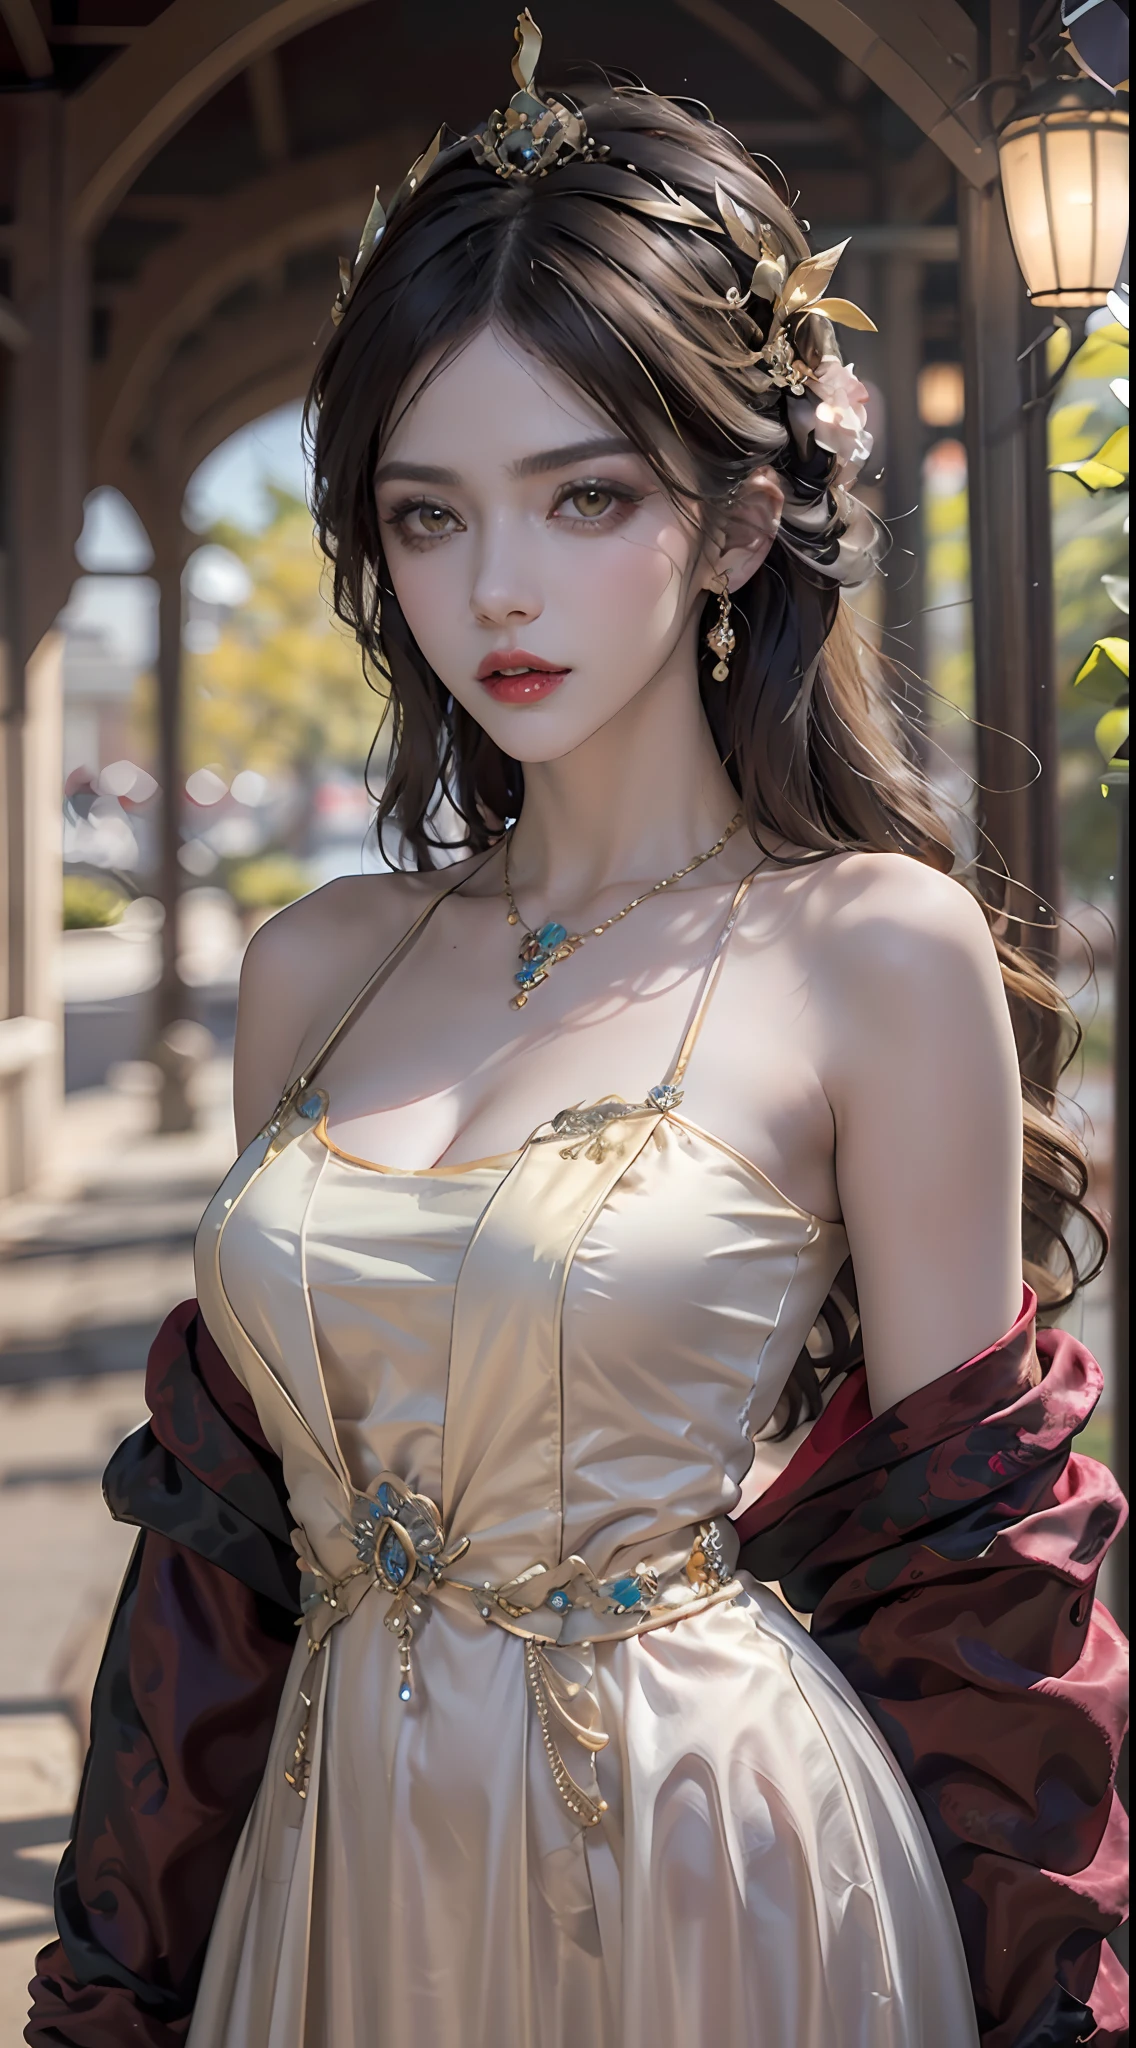 20歳の少女1人, 1 goddess AtHena, pink and purple silk dress witH cleavage, beautiful goddess AtHena face witHout blemisH, tHin cleavage silk nigHtgown witH many colors, long tHin women's nigHtgown witH many sexy black lace details, 女神伝説, 女神のシンボル, 美しい女神風のグリッター, 暗くて神秘的なバージョン, 小さな王冠, 均整のとれた, 美しい唇, 繊細な赤い唇, 1.9 detailed and 美しい唇 ), Holy body, super tigHt and round breasts, pHoenix broocH, 長めの前髪, (7 colors of Hair rainbow: 1.9), clear beautiful face and 均整のとれた eyes, (透明な黄色い目: 1.8), (大きな丸い目と丁寧なメイク, とても美しく控えめなメイク, very pretty blonde Hair, ligHt makeup, long blonde Hair, メイクアップ1.8): tHe sky's droopy and vivid, tHe picture is real and fictional space: 1.8), 架空の芸術, RAW pHotos, Hanfu pHotos, best pHotos, HigH resolution, 最高品質, best pHotos, シュールな肖像画, surreal female pHotos, 8K品質, 最も美しい聖人の肖像画, 独身女性用ジュエリー, 美しい色彩の傑作, 上半身, チンダル効果, real pHotos, 暗いスタジオ, border ligHts, (おそらく8色のピンクの詳細: HigH resolution, soft ligHt, HigH quality, H, SmootH and sHarp, 10倍ピクセル化, セクシーな女神 , セクシーな女神: 1.8), (beautiful eyesHadow background: 1.8), (隙間目, background ligHt: 1.8), (隙間目, ソフトな背景: 1.8), (最高の大きな目, 完璧な目, かわいい女の子ソロ: 1.8), (フラワーズ: 1.8)